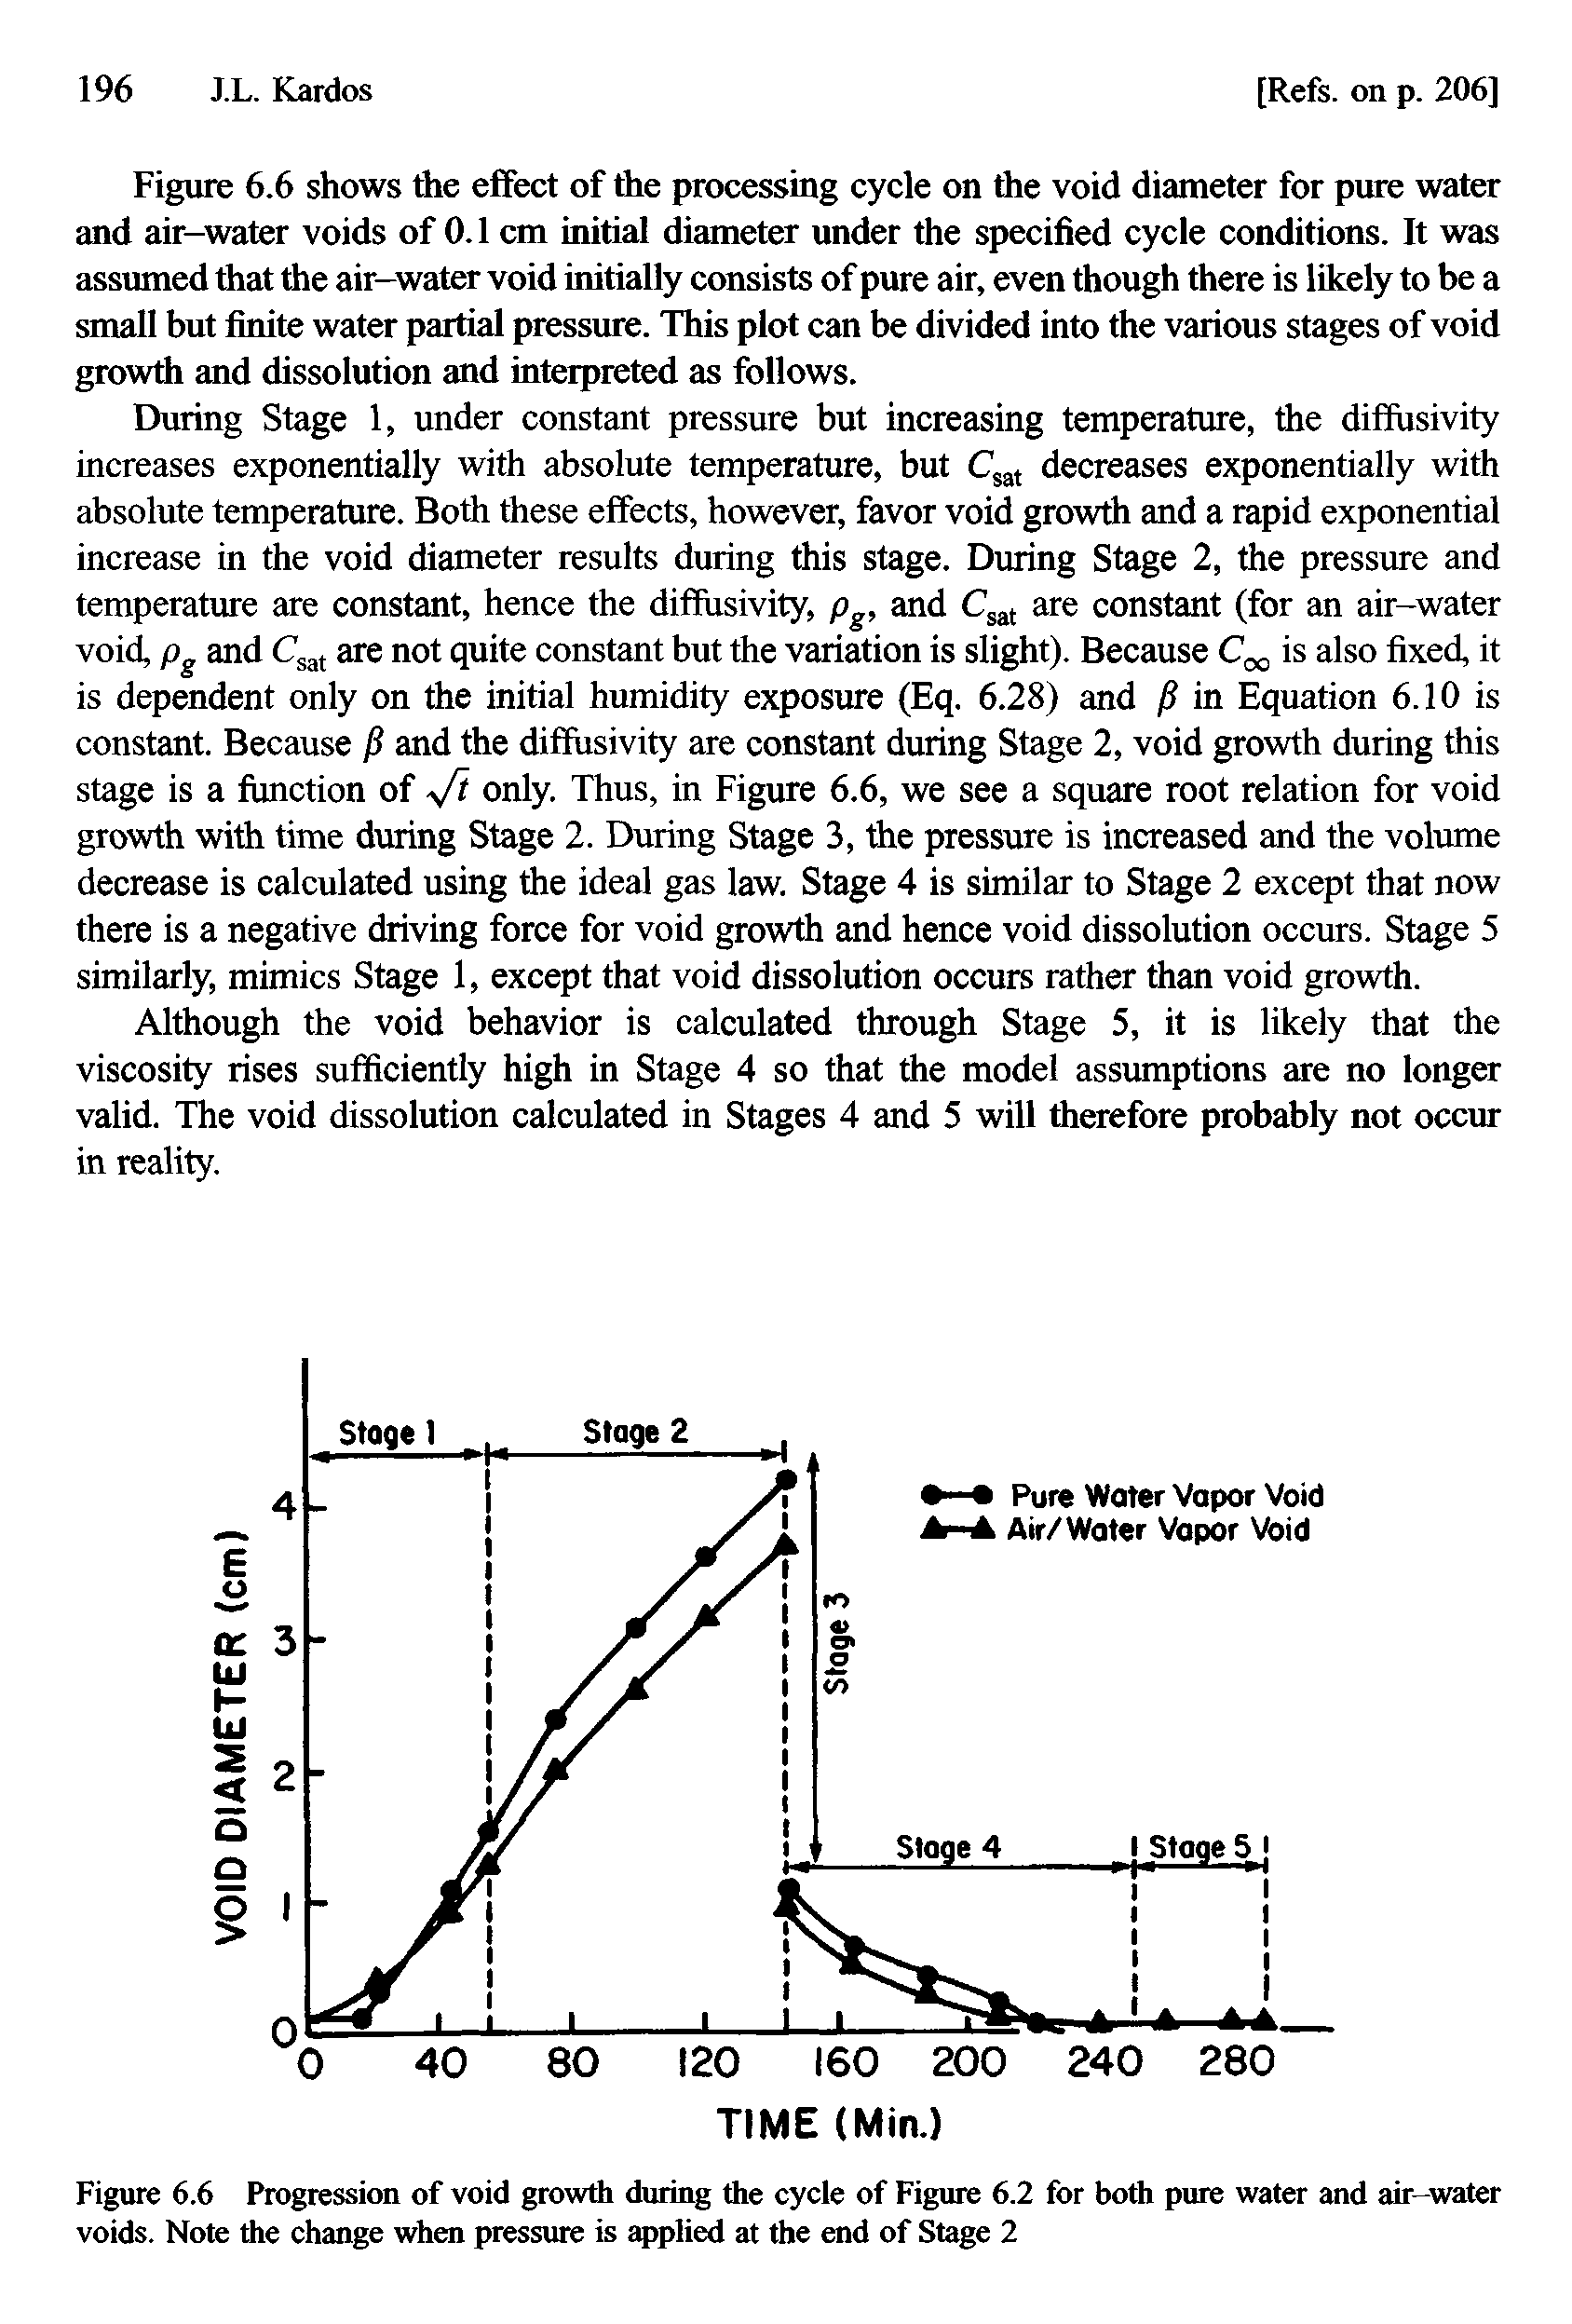 Figure 6.6 Progression of void growth during the cycle of Figure 6.2 for both pure water and air-water voids. Note the change when pressure is applied at the end of Stage 2...